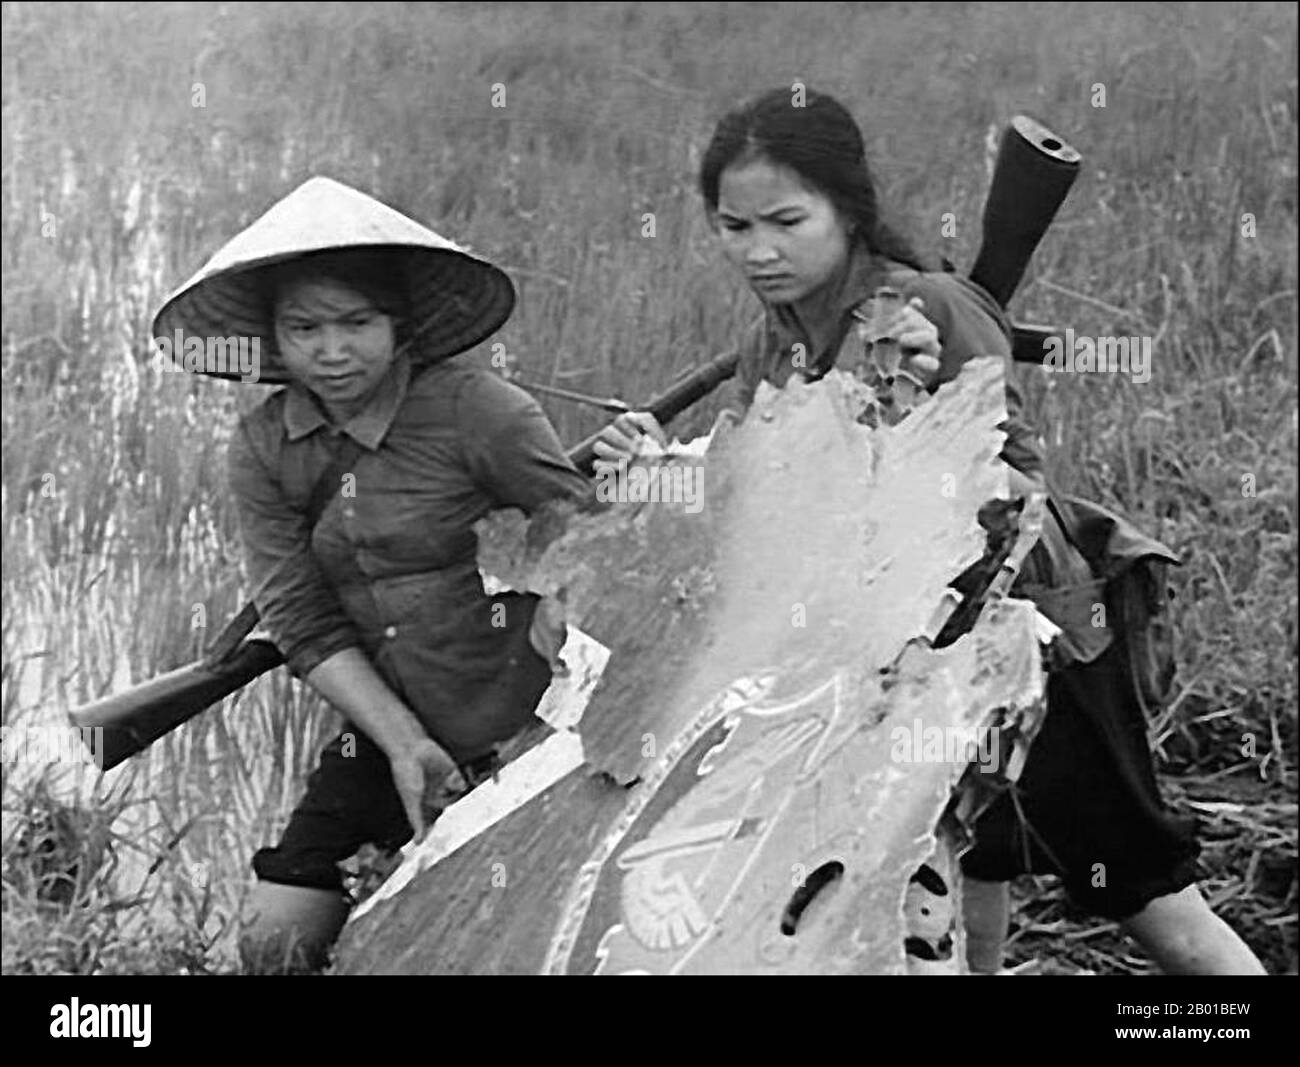 Vietnam: Two National Liberation Front (NLF,  Viet Cong) women fighters salvage wreckage from a downed USAF plane, c. 1968.  The Second Indochina War, known in America as the Vietnam War, was a Cold War era military conflict that occurred in Vietnam, Laos, and Cambodia from 1 November 1955 to the fall of Saigon on 30 April 1975. This war followed the First Indochina War and was fought between North Vietnam, supported by its communist allies, and the government of South Vietnam, supported by the U.S. and other anti-communist nations. Stock Photo